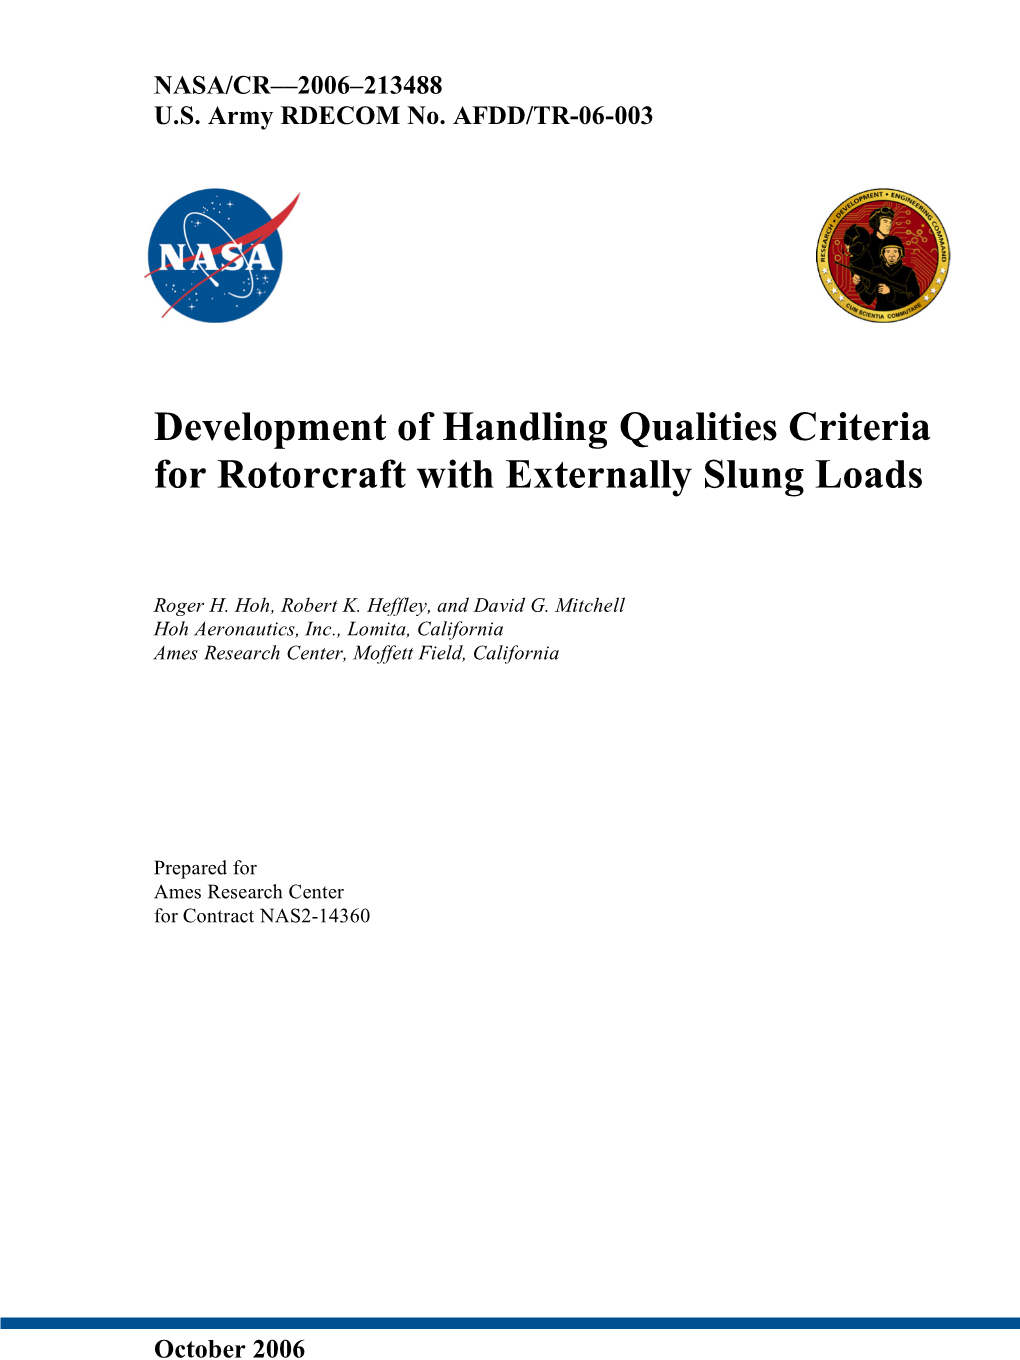 Development of Handling Qualities Criteria for Rotorcraft with Externally Slung Loads